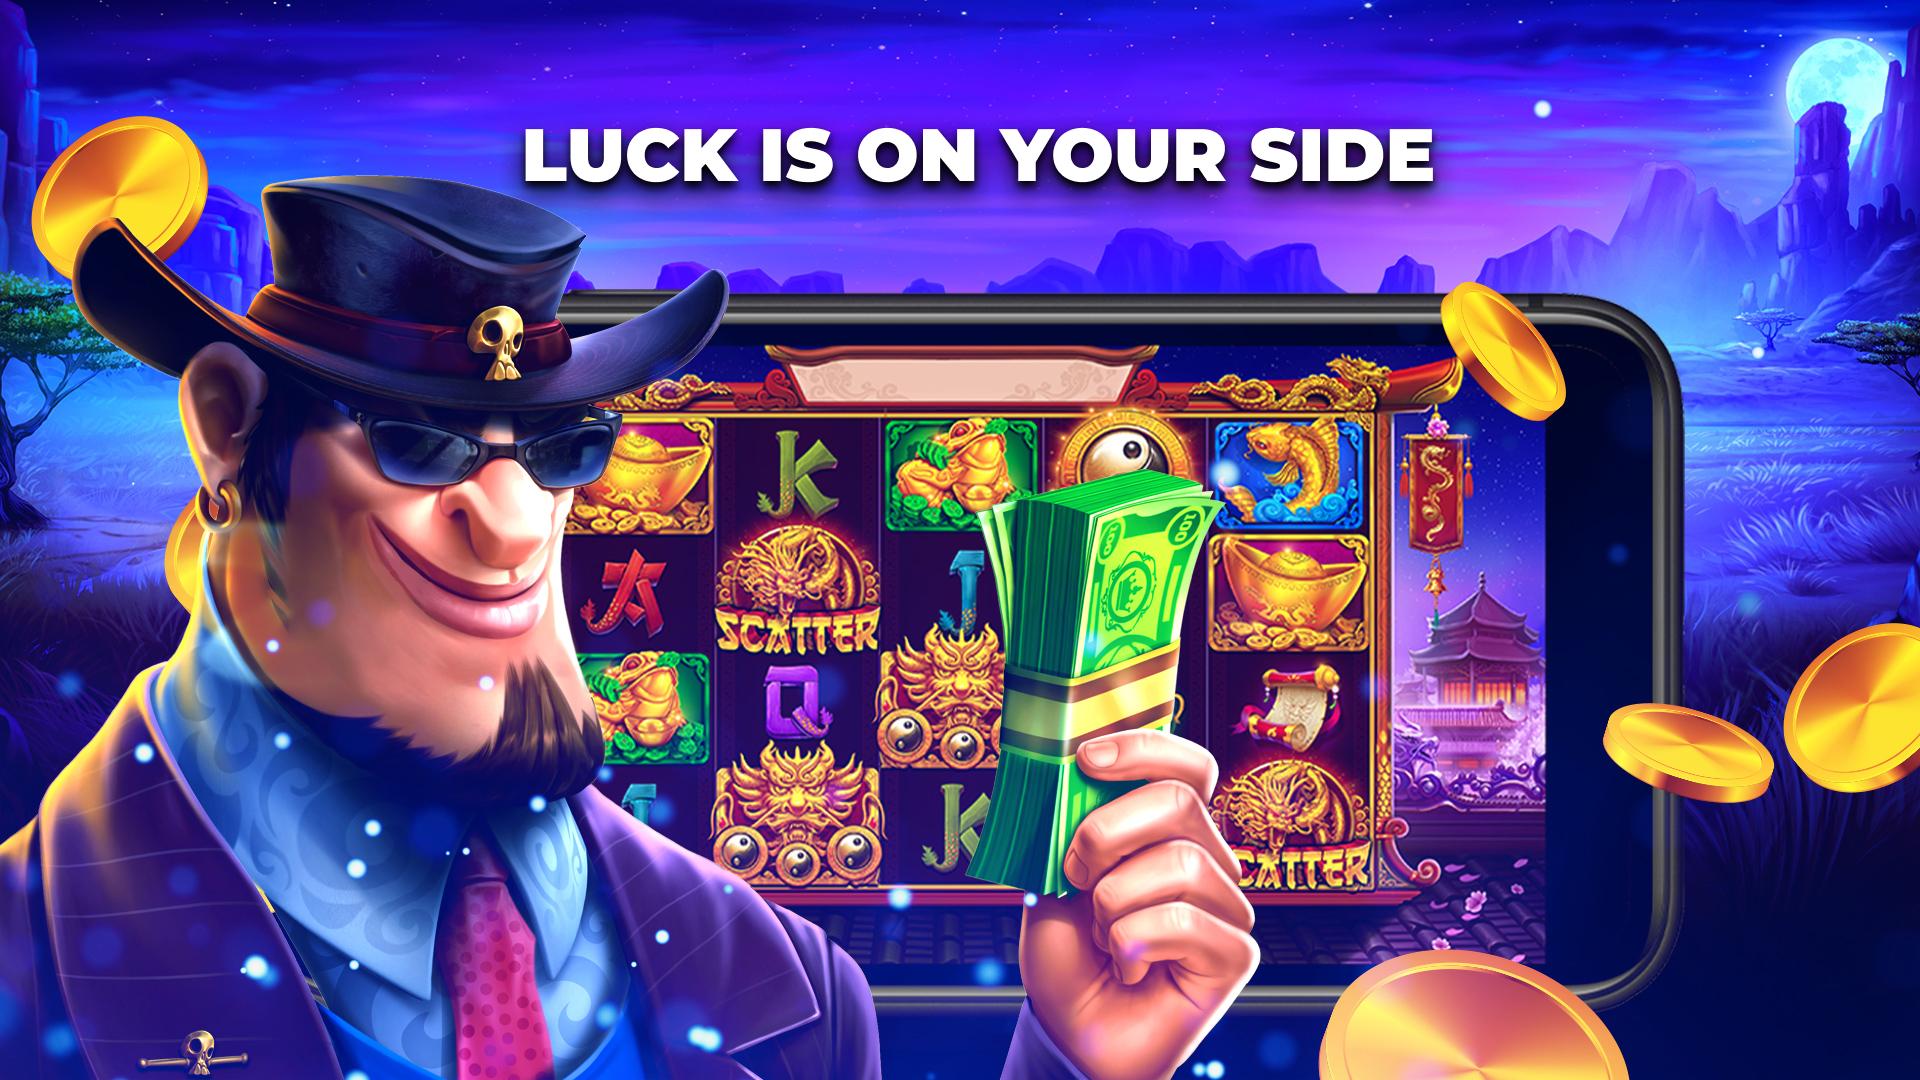 Wild West Gold казино. Wild West слот. Wild West Gold Slot. Wild West Gold занос. Lucky real casino lucky real casino space